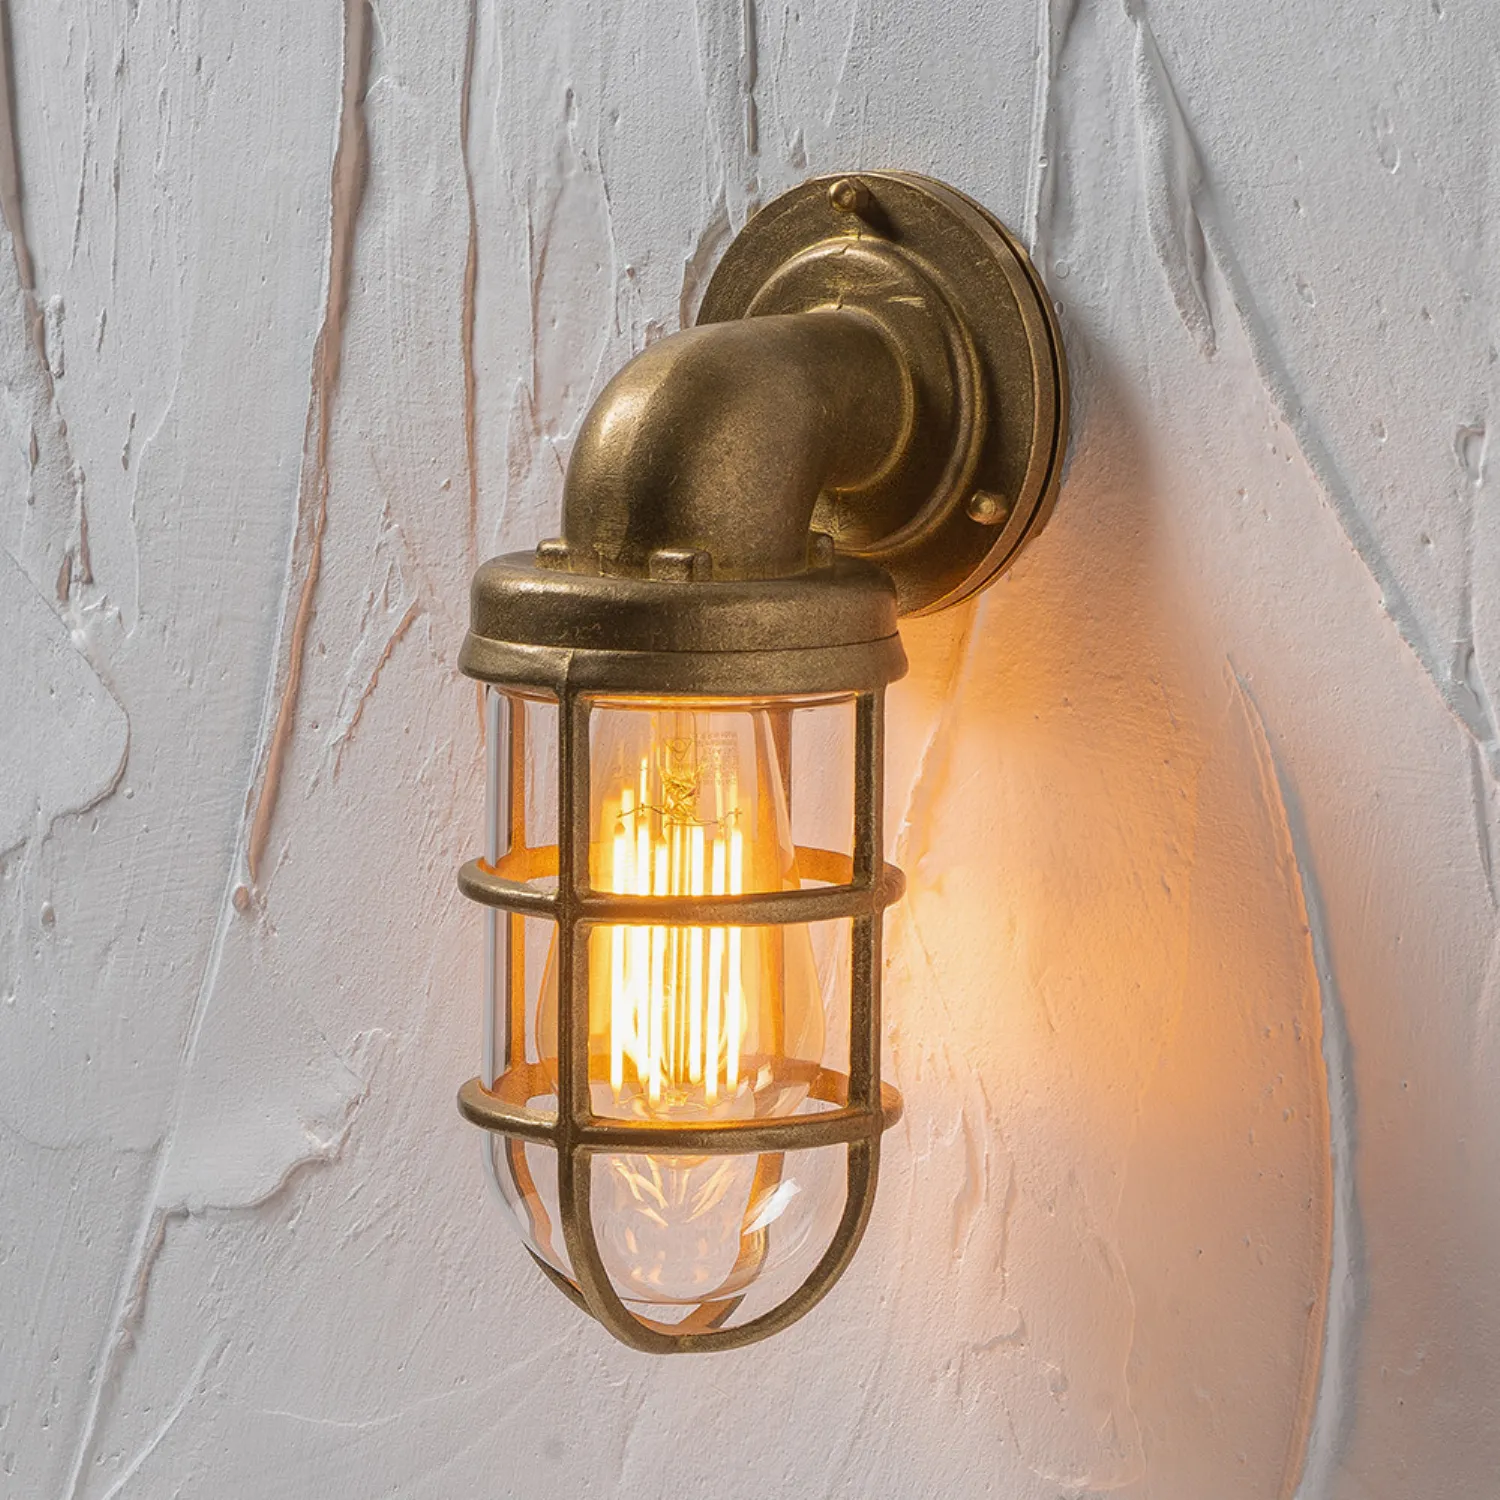 Antique Brass Metal Caged Hanging Outdoor Wall Light